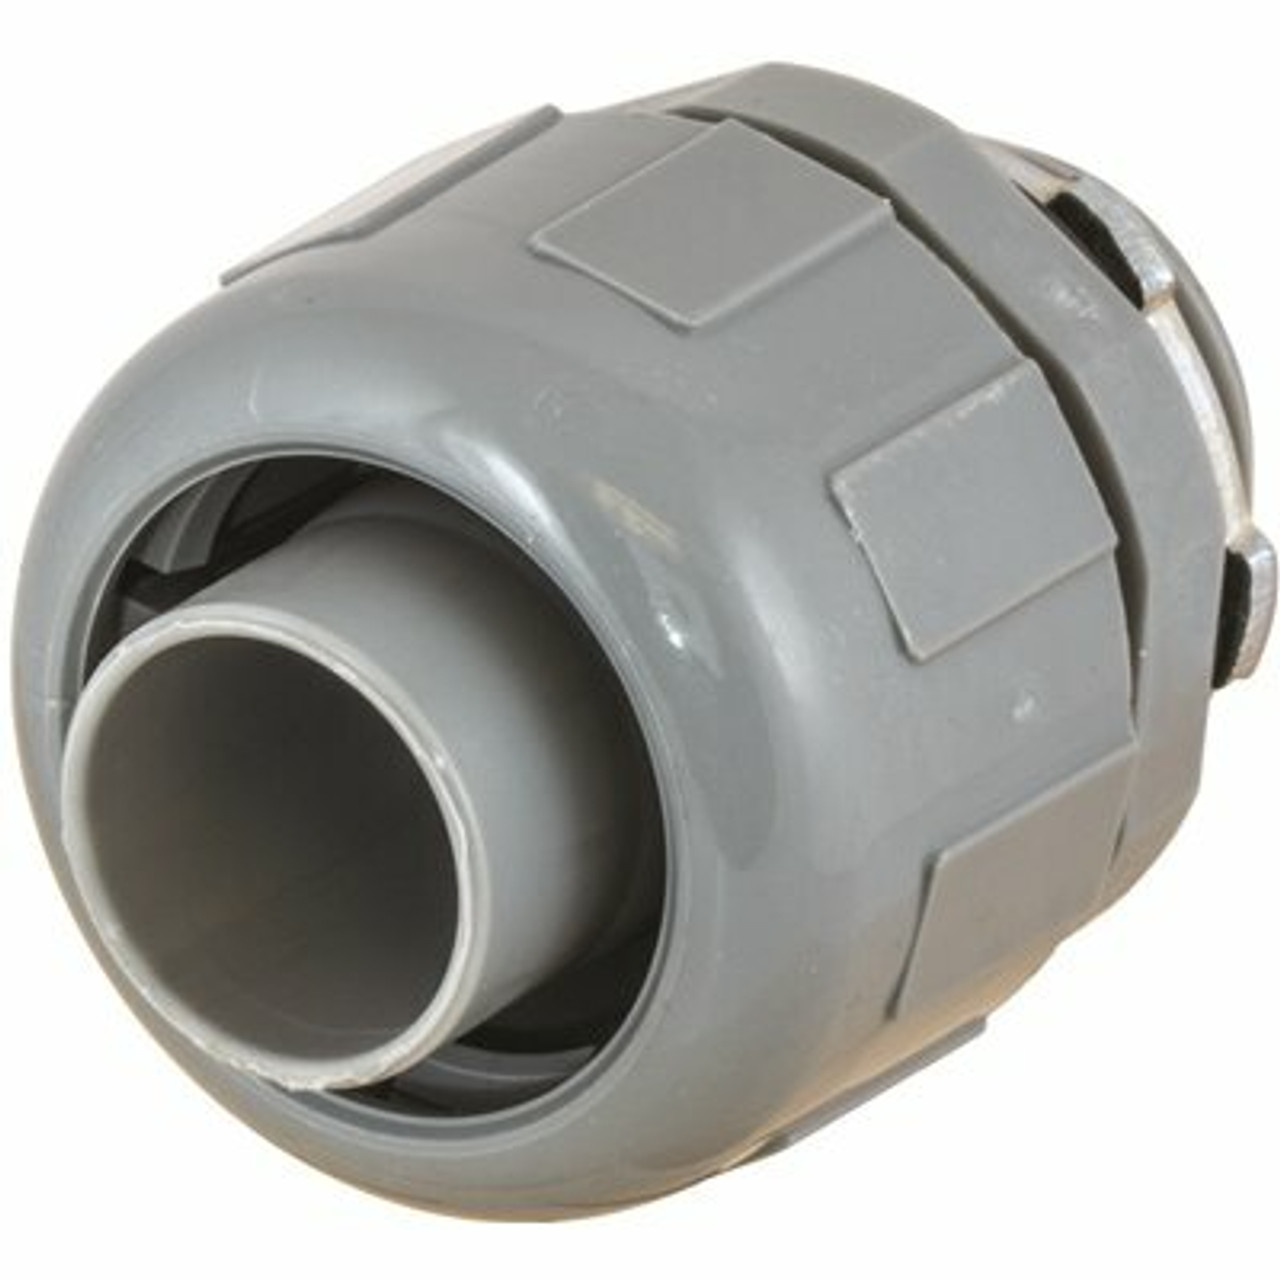 Hubbell Wiring 1/2 In. Standard Fitting Straight Non-Metallic Liquid Tight Male Connector